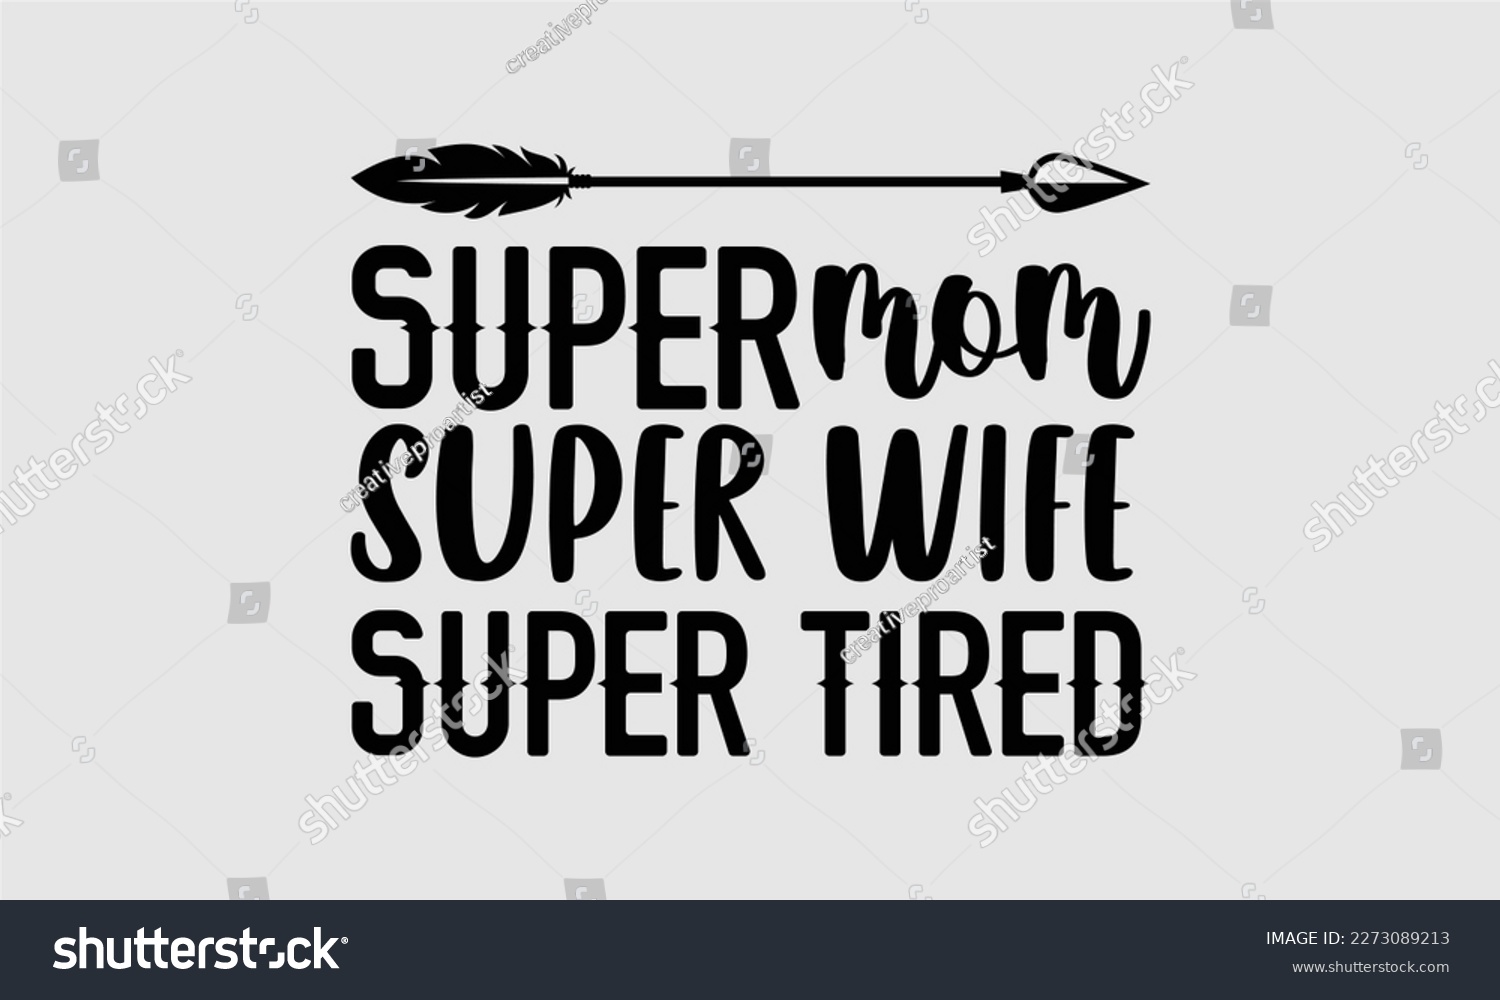 SVG of 
Super mom super wife super tired- Wife T- shirt design, Hand drawn vintage illustration with hand-lettering and decoration elements, greeting card template with typography text, eps, svg Files for Cu svg